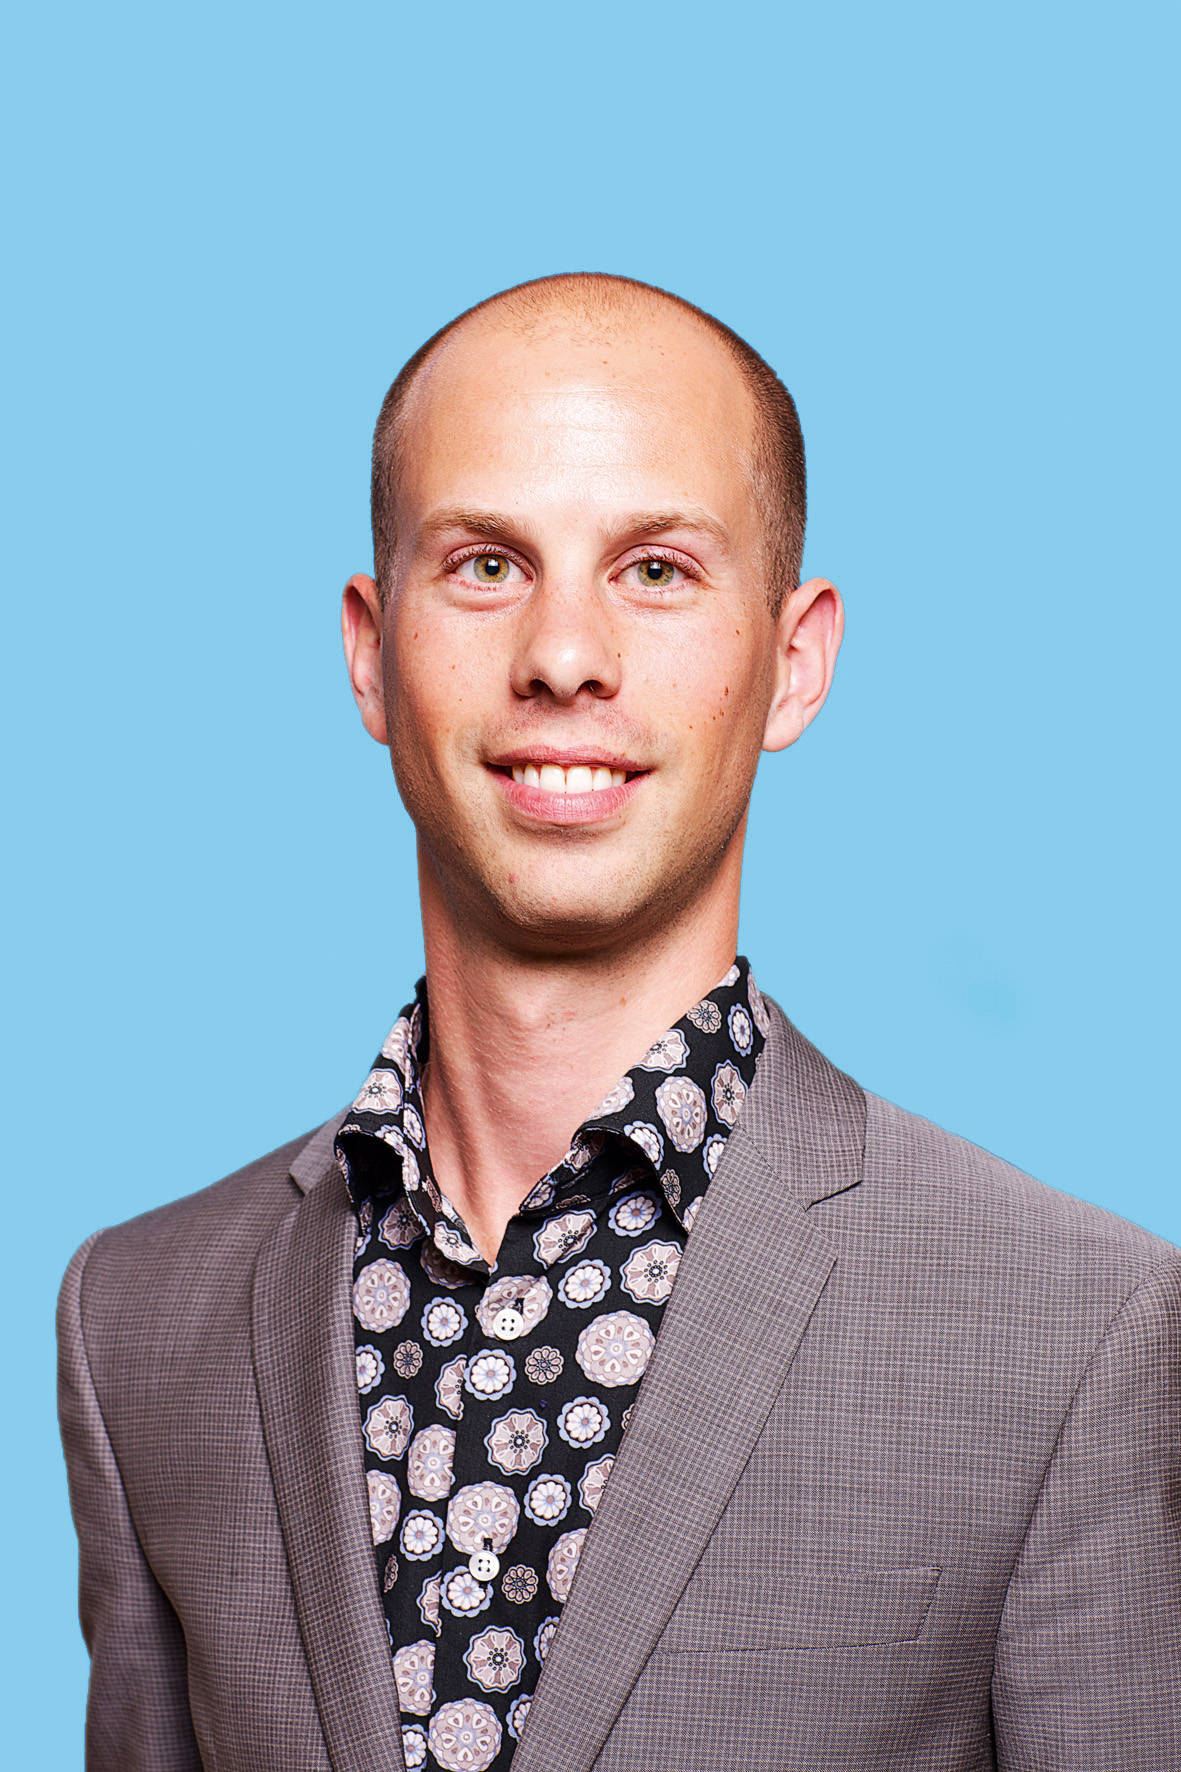 a balding man in a grey suit and flower shirt